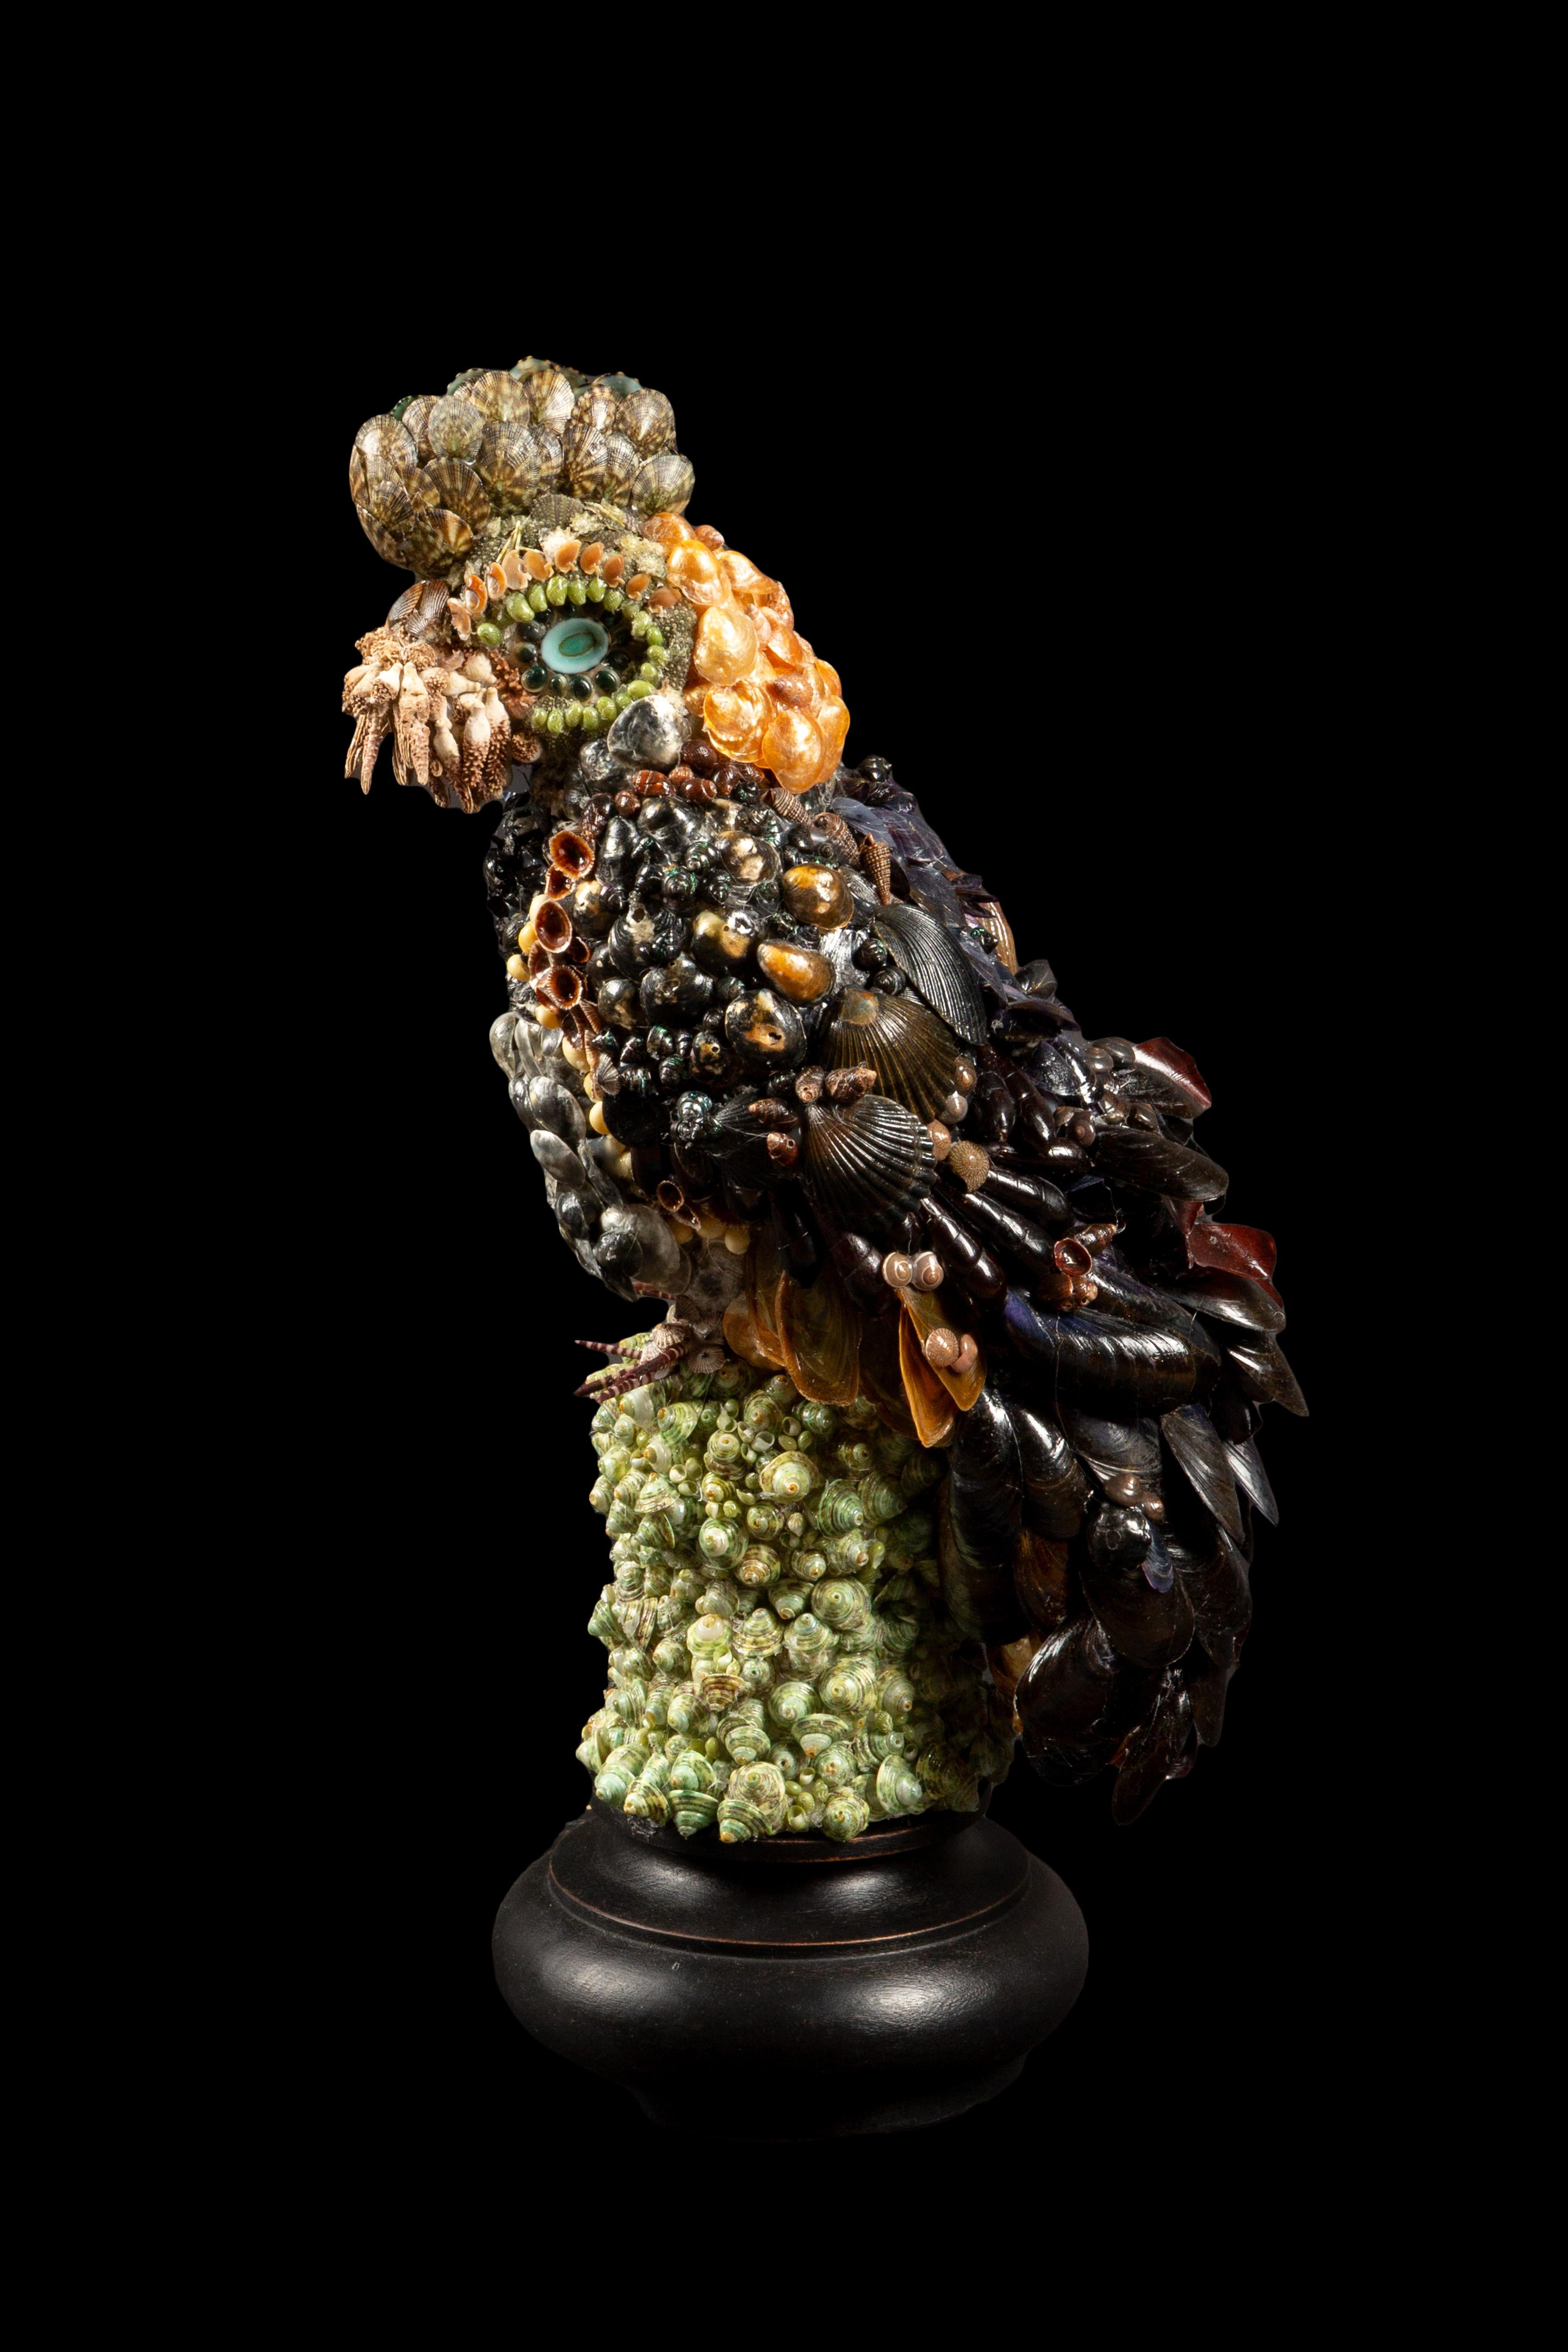 Meticulously crafted, hand-made Mixed Shell Mosaic Parrot, standing tall at an impressive 17.5 inches in height. This exquisite piece combines a harmonious blend of various shells, expertly arranged to capture the intricate beauty of a parrot in